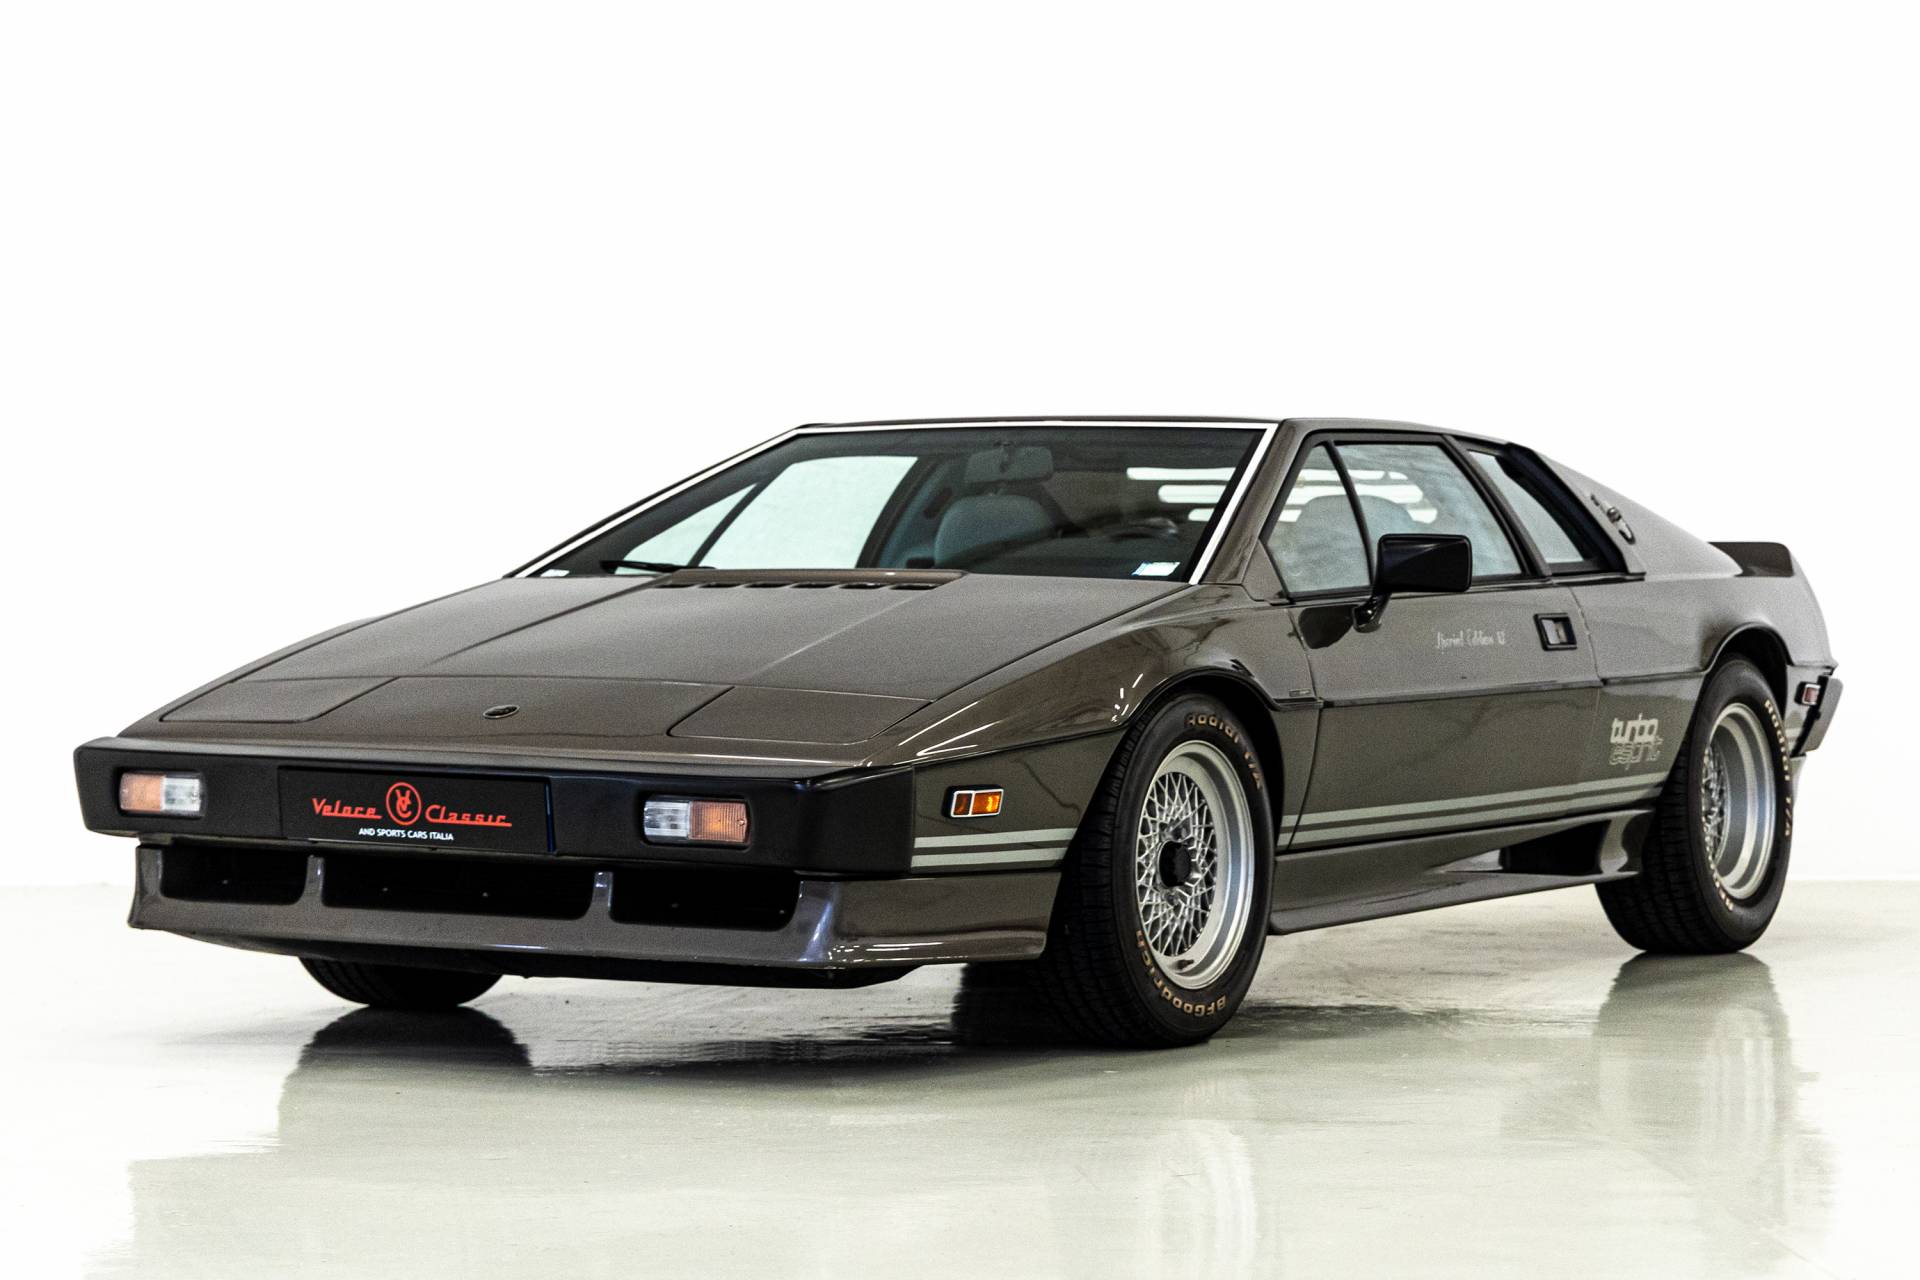 For Sale: Lotus Esprit Turbo (1983) offered for £58,994